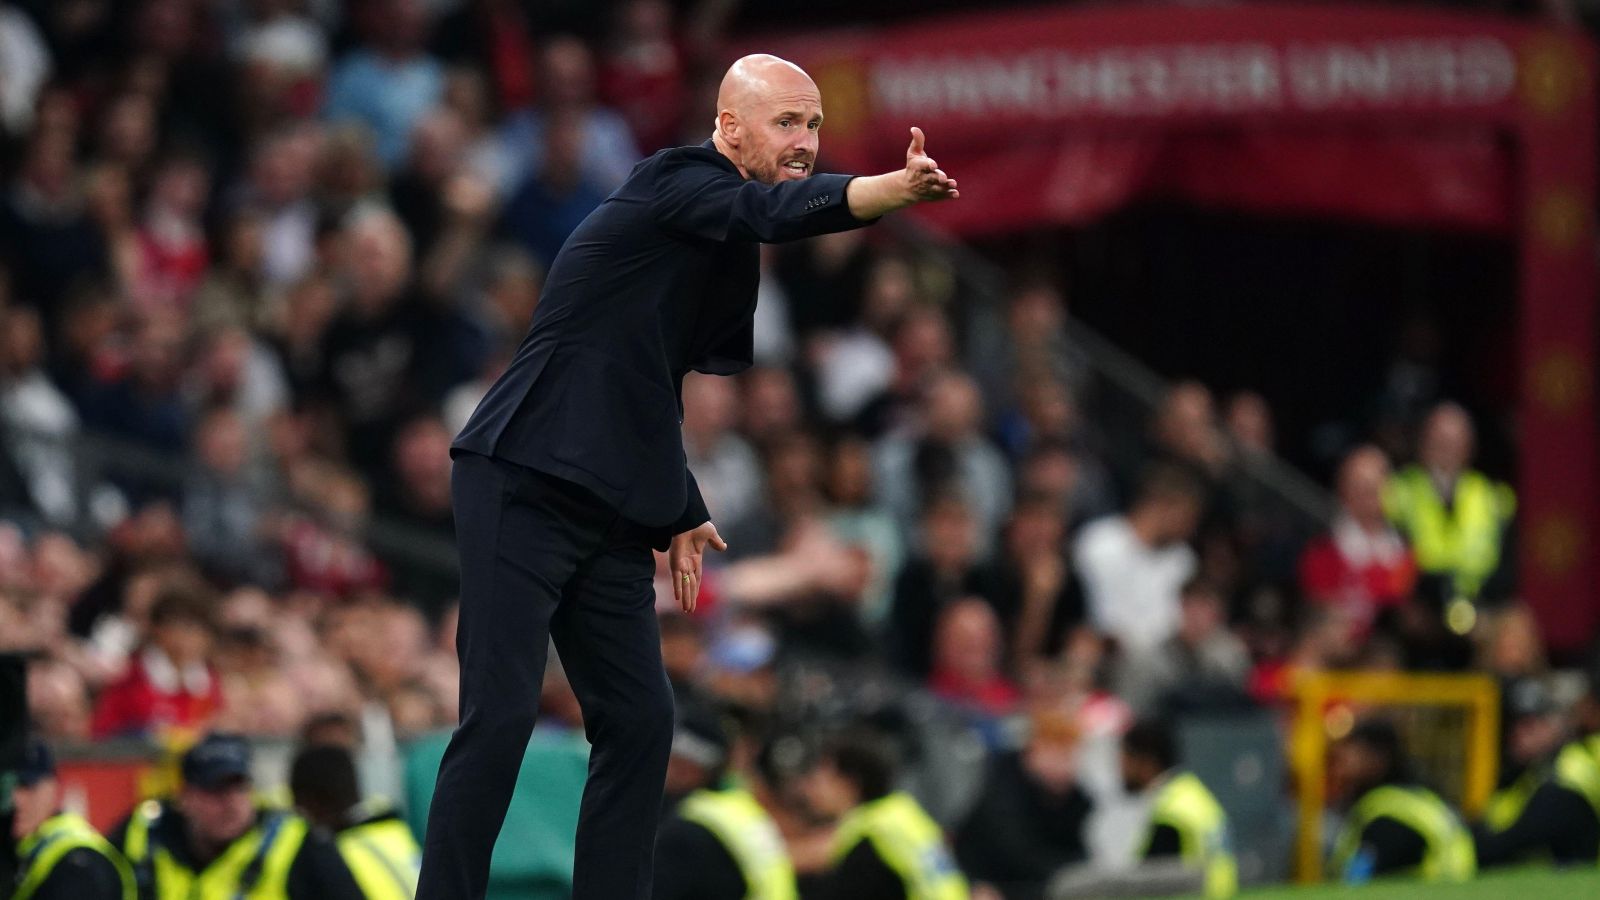 ERIK TEN HAG WAS SURE TO MENTION TOTTENHAM AFTER MANCHESTER UNITED’S FA CUP WIN V LIVERPOOL - Bóng Đá